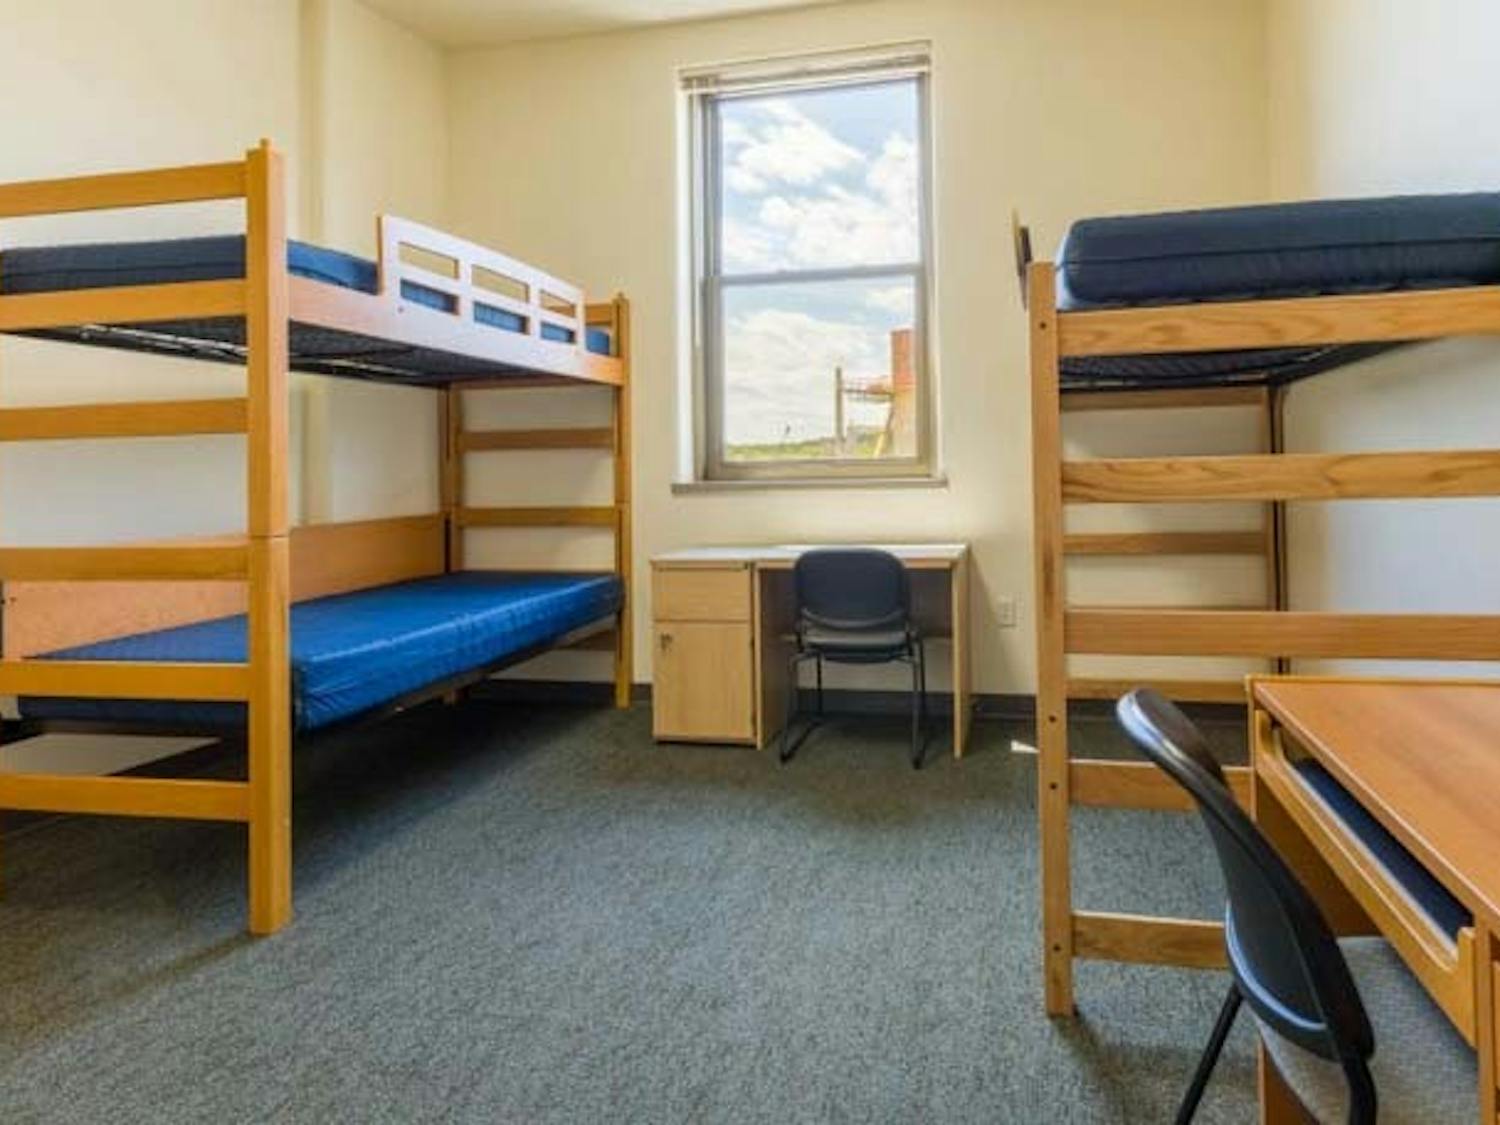 An empty residence hall room at the University of Wisconsin-Madison.